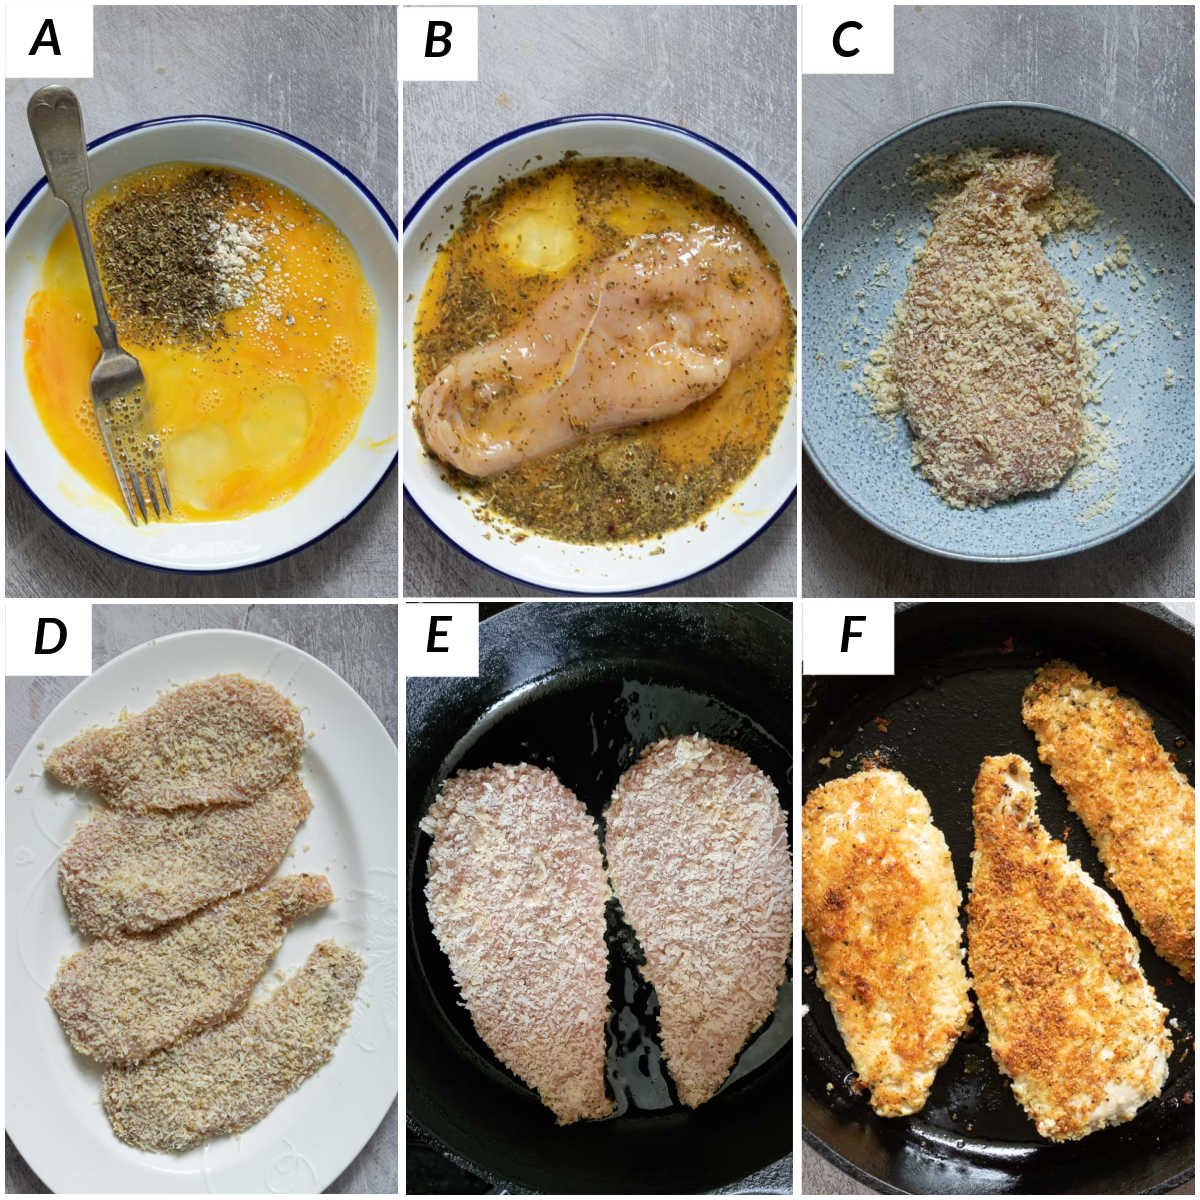 image collage showing the steps for making parmesan crusted chicken